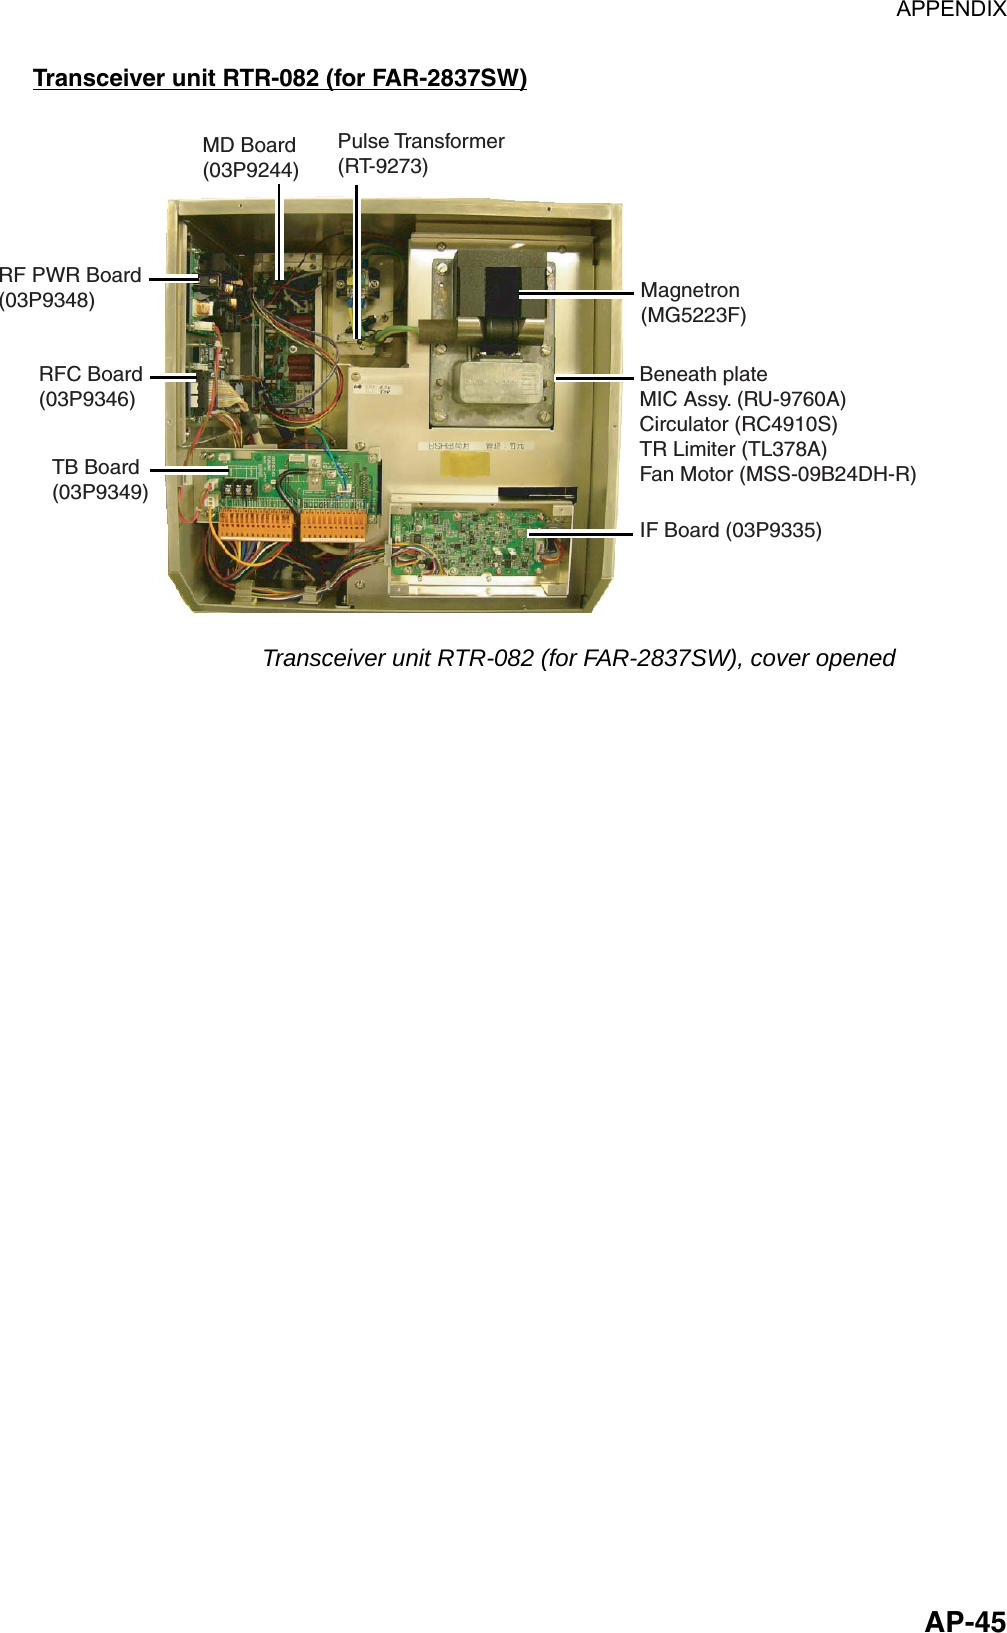 APPENDIX  AP-45Transceiver unit RTR-082 (for FAR-2837SW) IF Board (03P9335)TB Board(03P9349)RFC Board(03P9346)RF PWR Board(03P9348)MD Board(03P9244)Magnetron(MG5223F)Beneath plateMIC Assy. (RU-9760A)Circulator (RC4910S)TR Limiter (TL378A)Fan Motor (MSS-09B24DH-R)Pulse Transformer(RT-9273) Transceiver unit RTR-082 (for FAR-2837SW), cover opened  